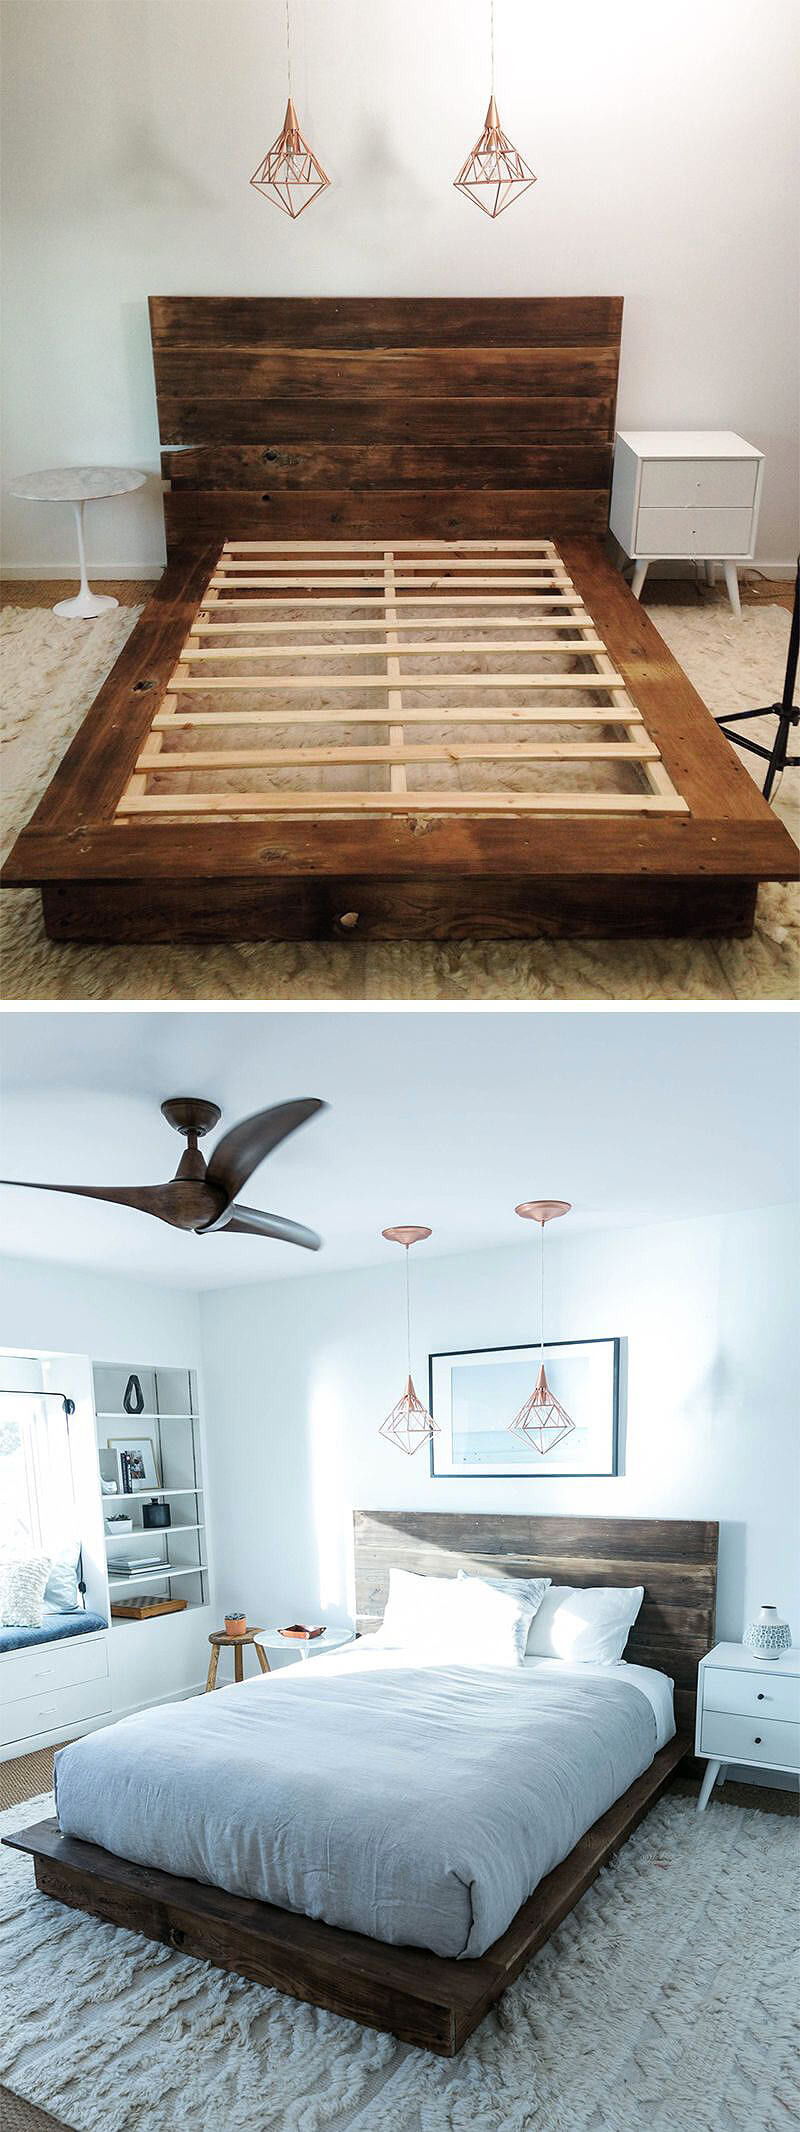 Diy Wood Projects
 34 DIY Reclaimed Wood Projects Ideas and Designs for 2019